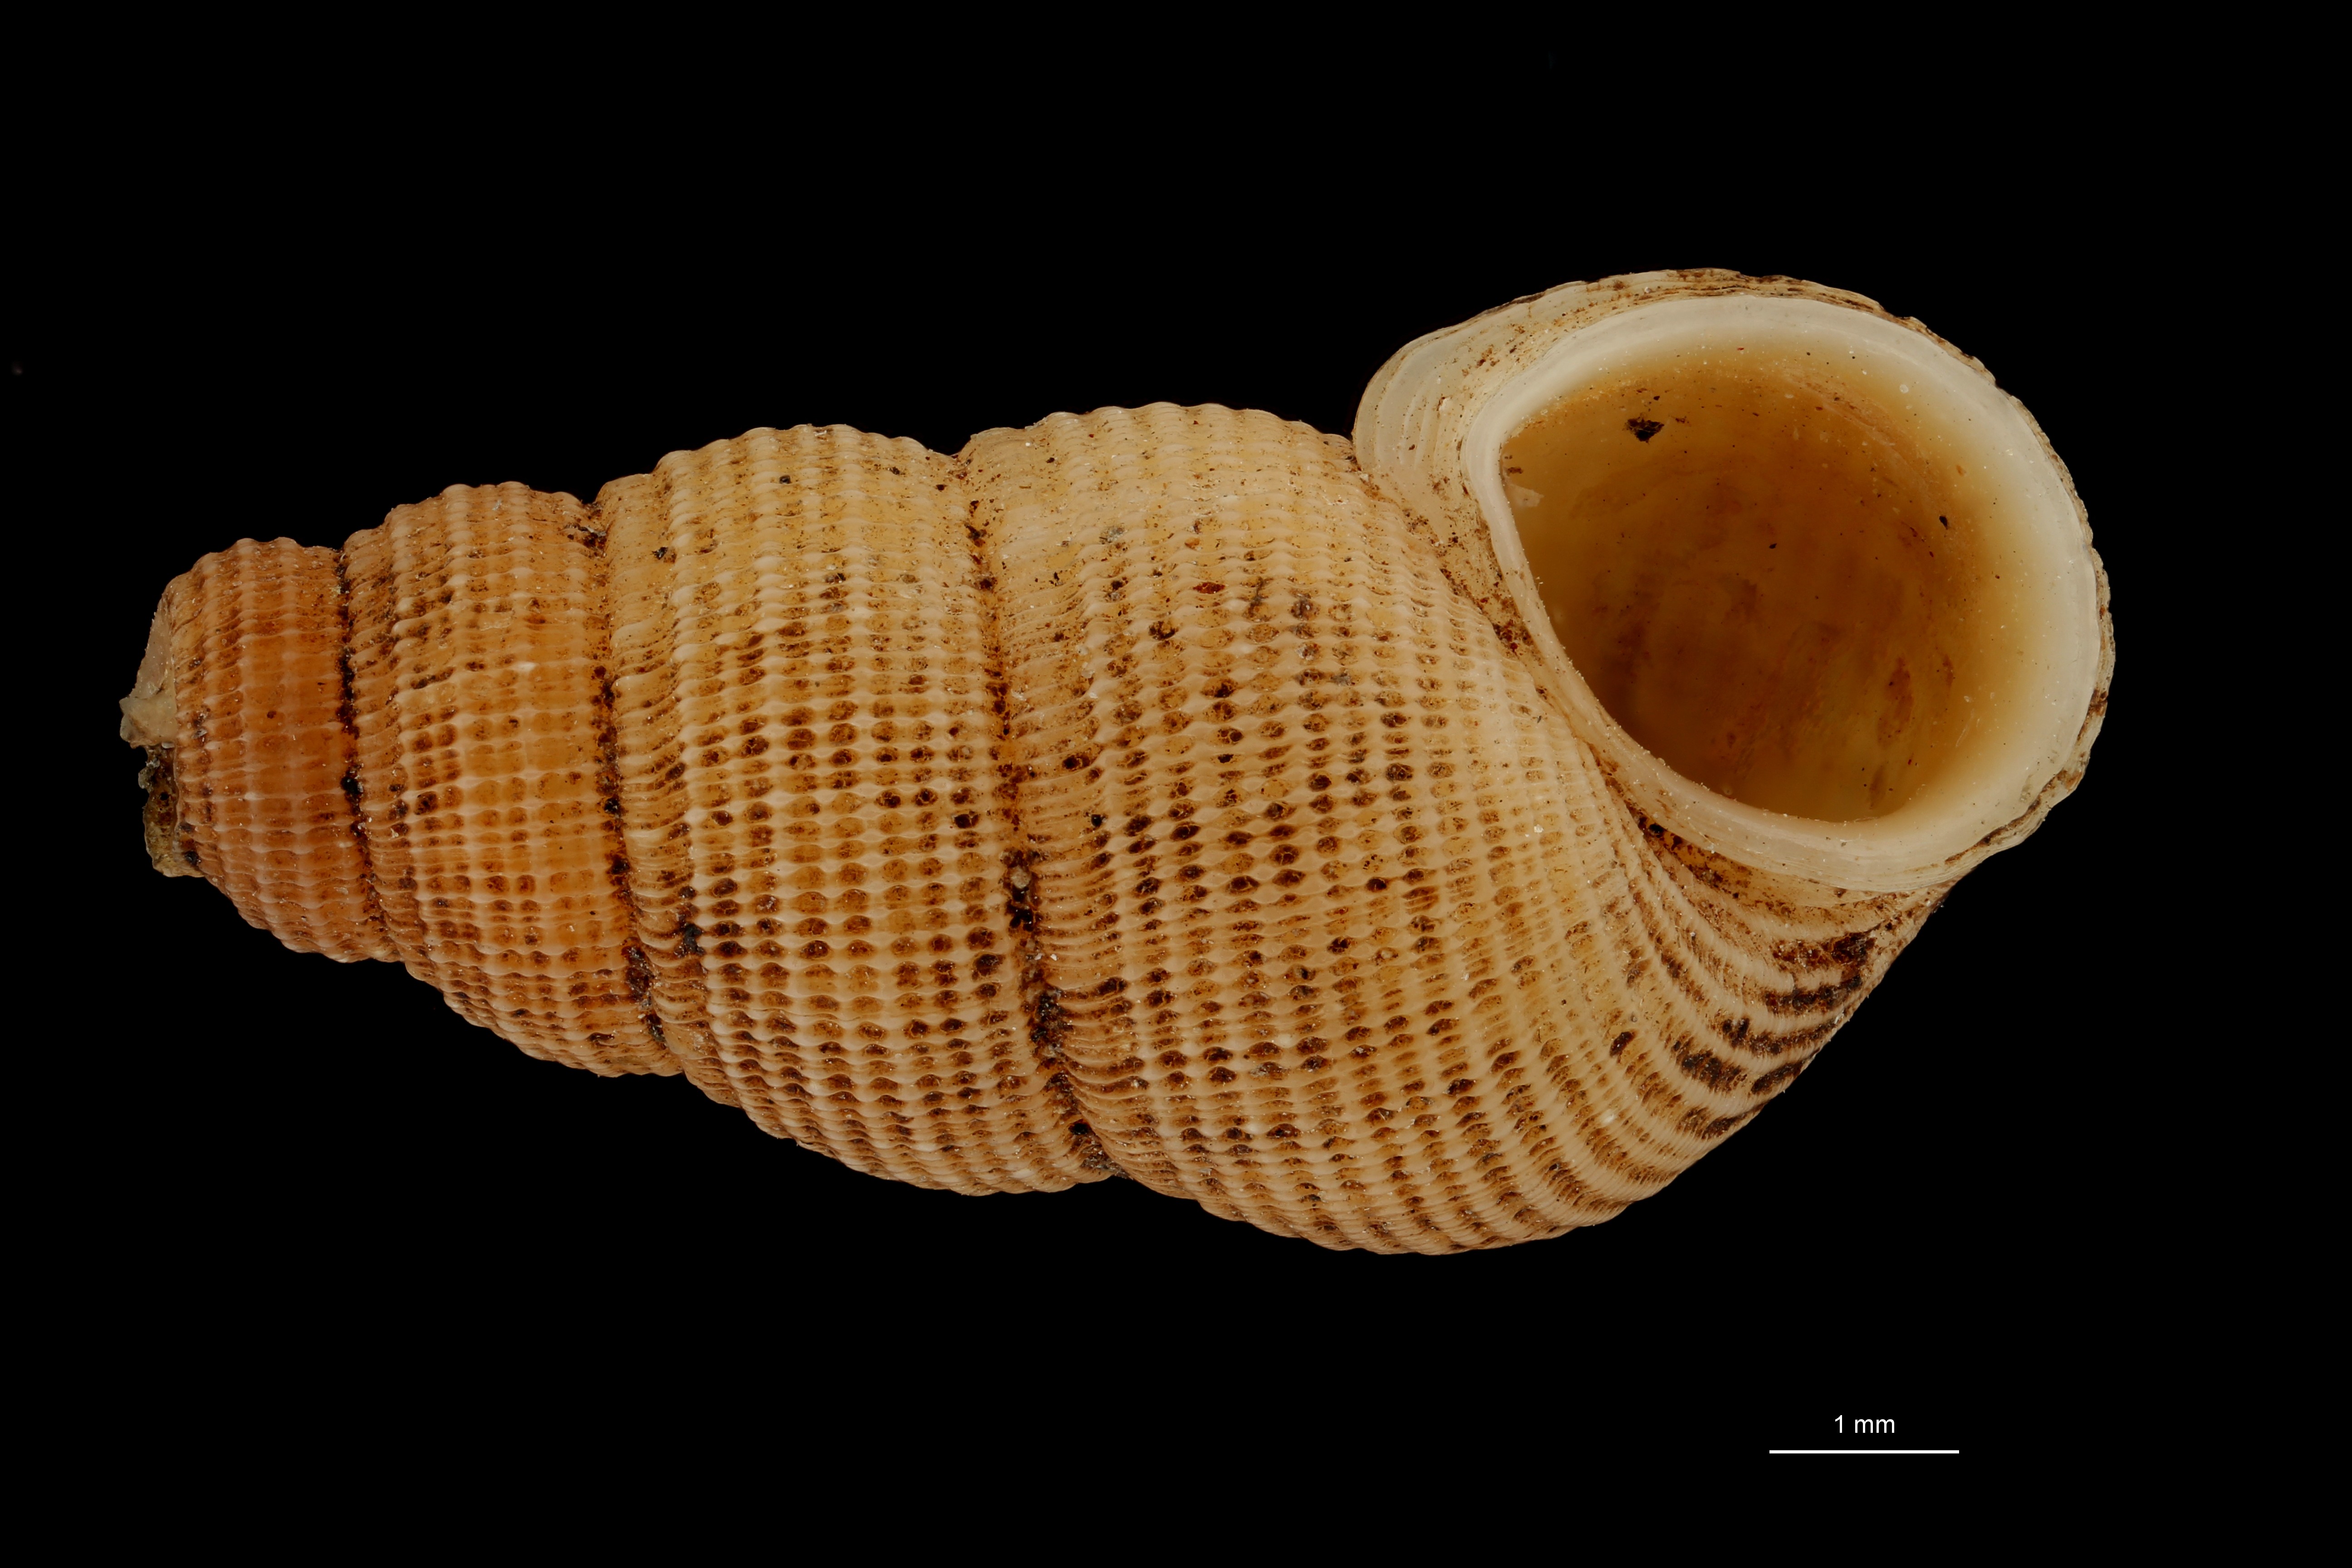 BE-RBINS-INV HOLOTYPE MT 201 Chondropoma caymanensis VENTRAL ZS DMap Scaled.jpg